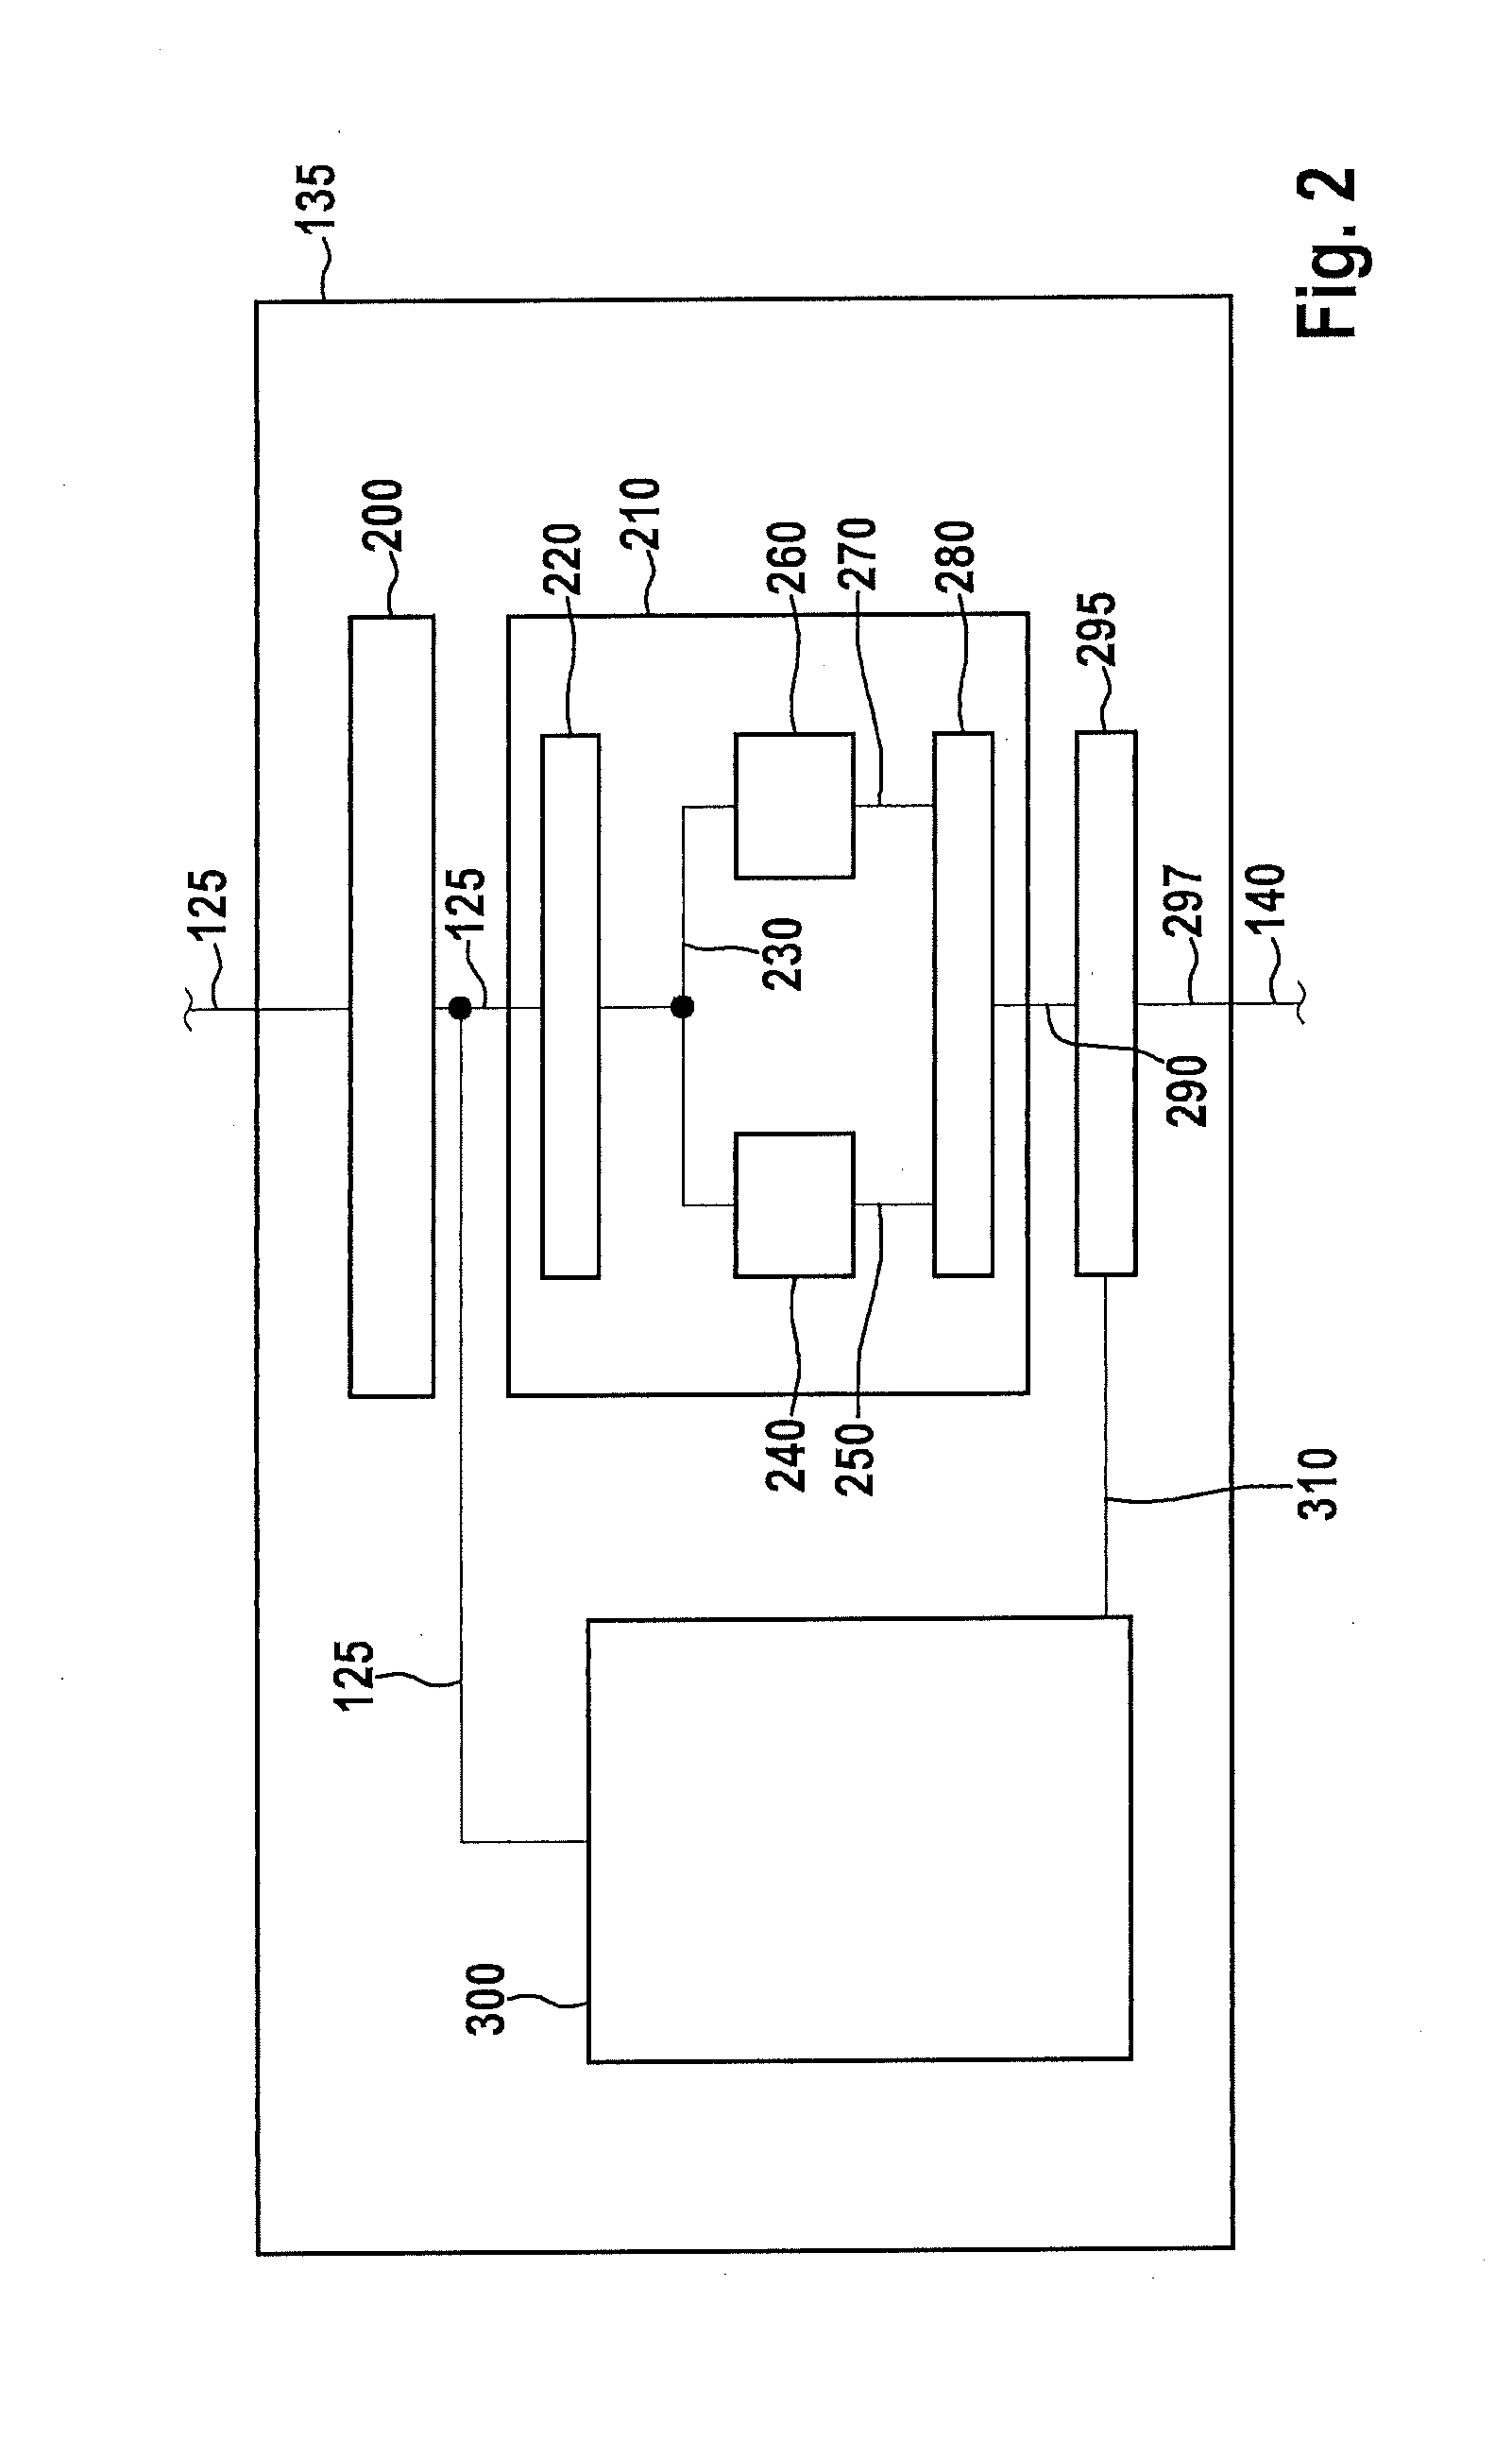 Method and apparatus for recognizing an intensity of an aerosol in a field of vision of a camera on a vehicle